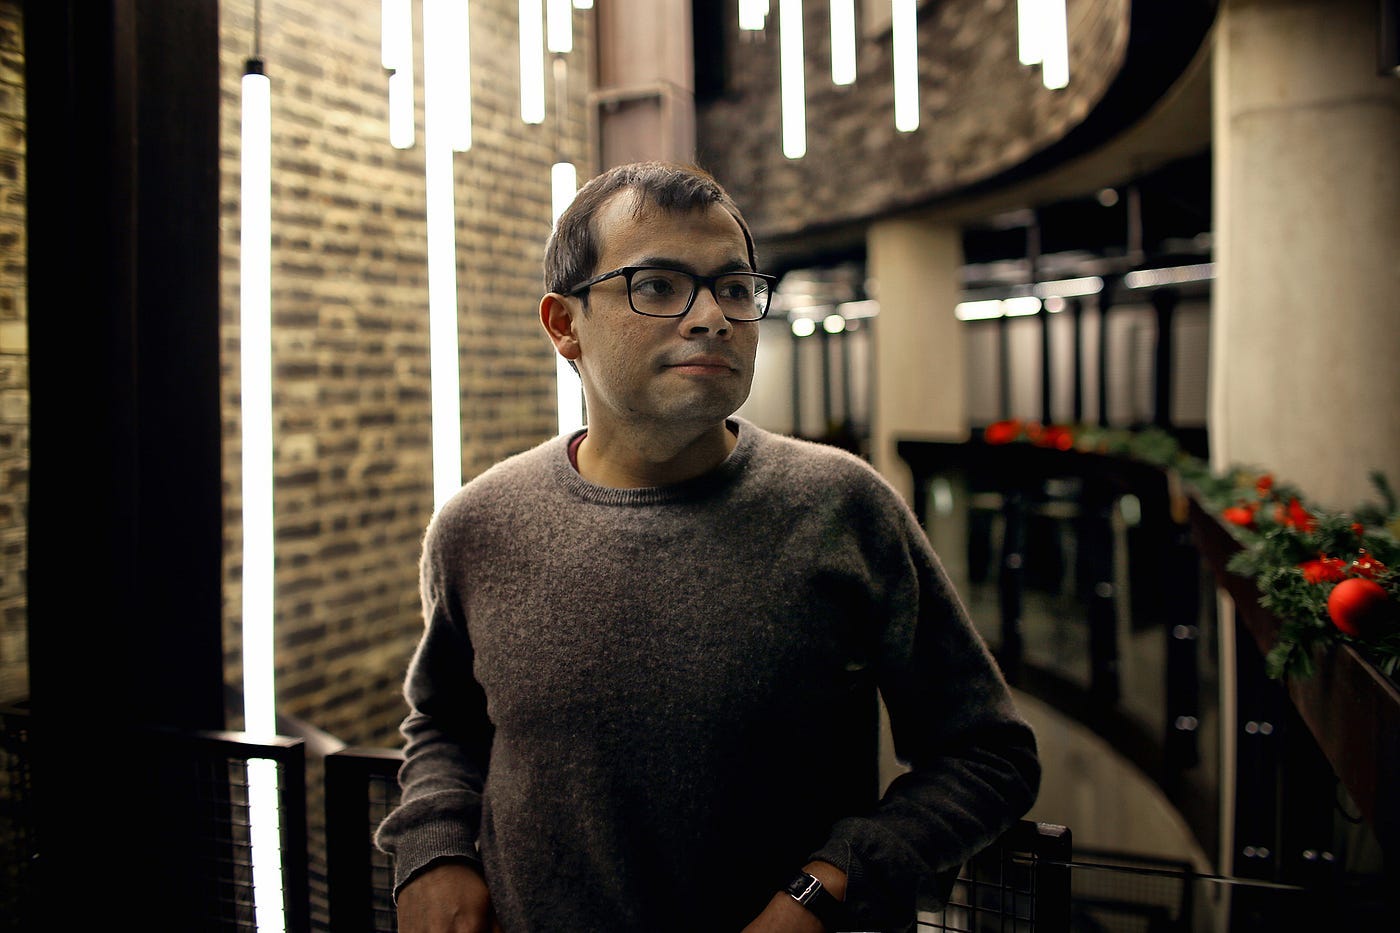 Going Deep Into the Mind of Demis Hassabis | by Steven Levy | From the WTF?  Economy to the Next Economy